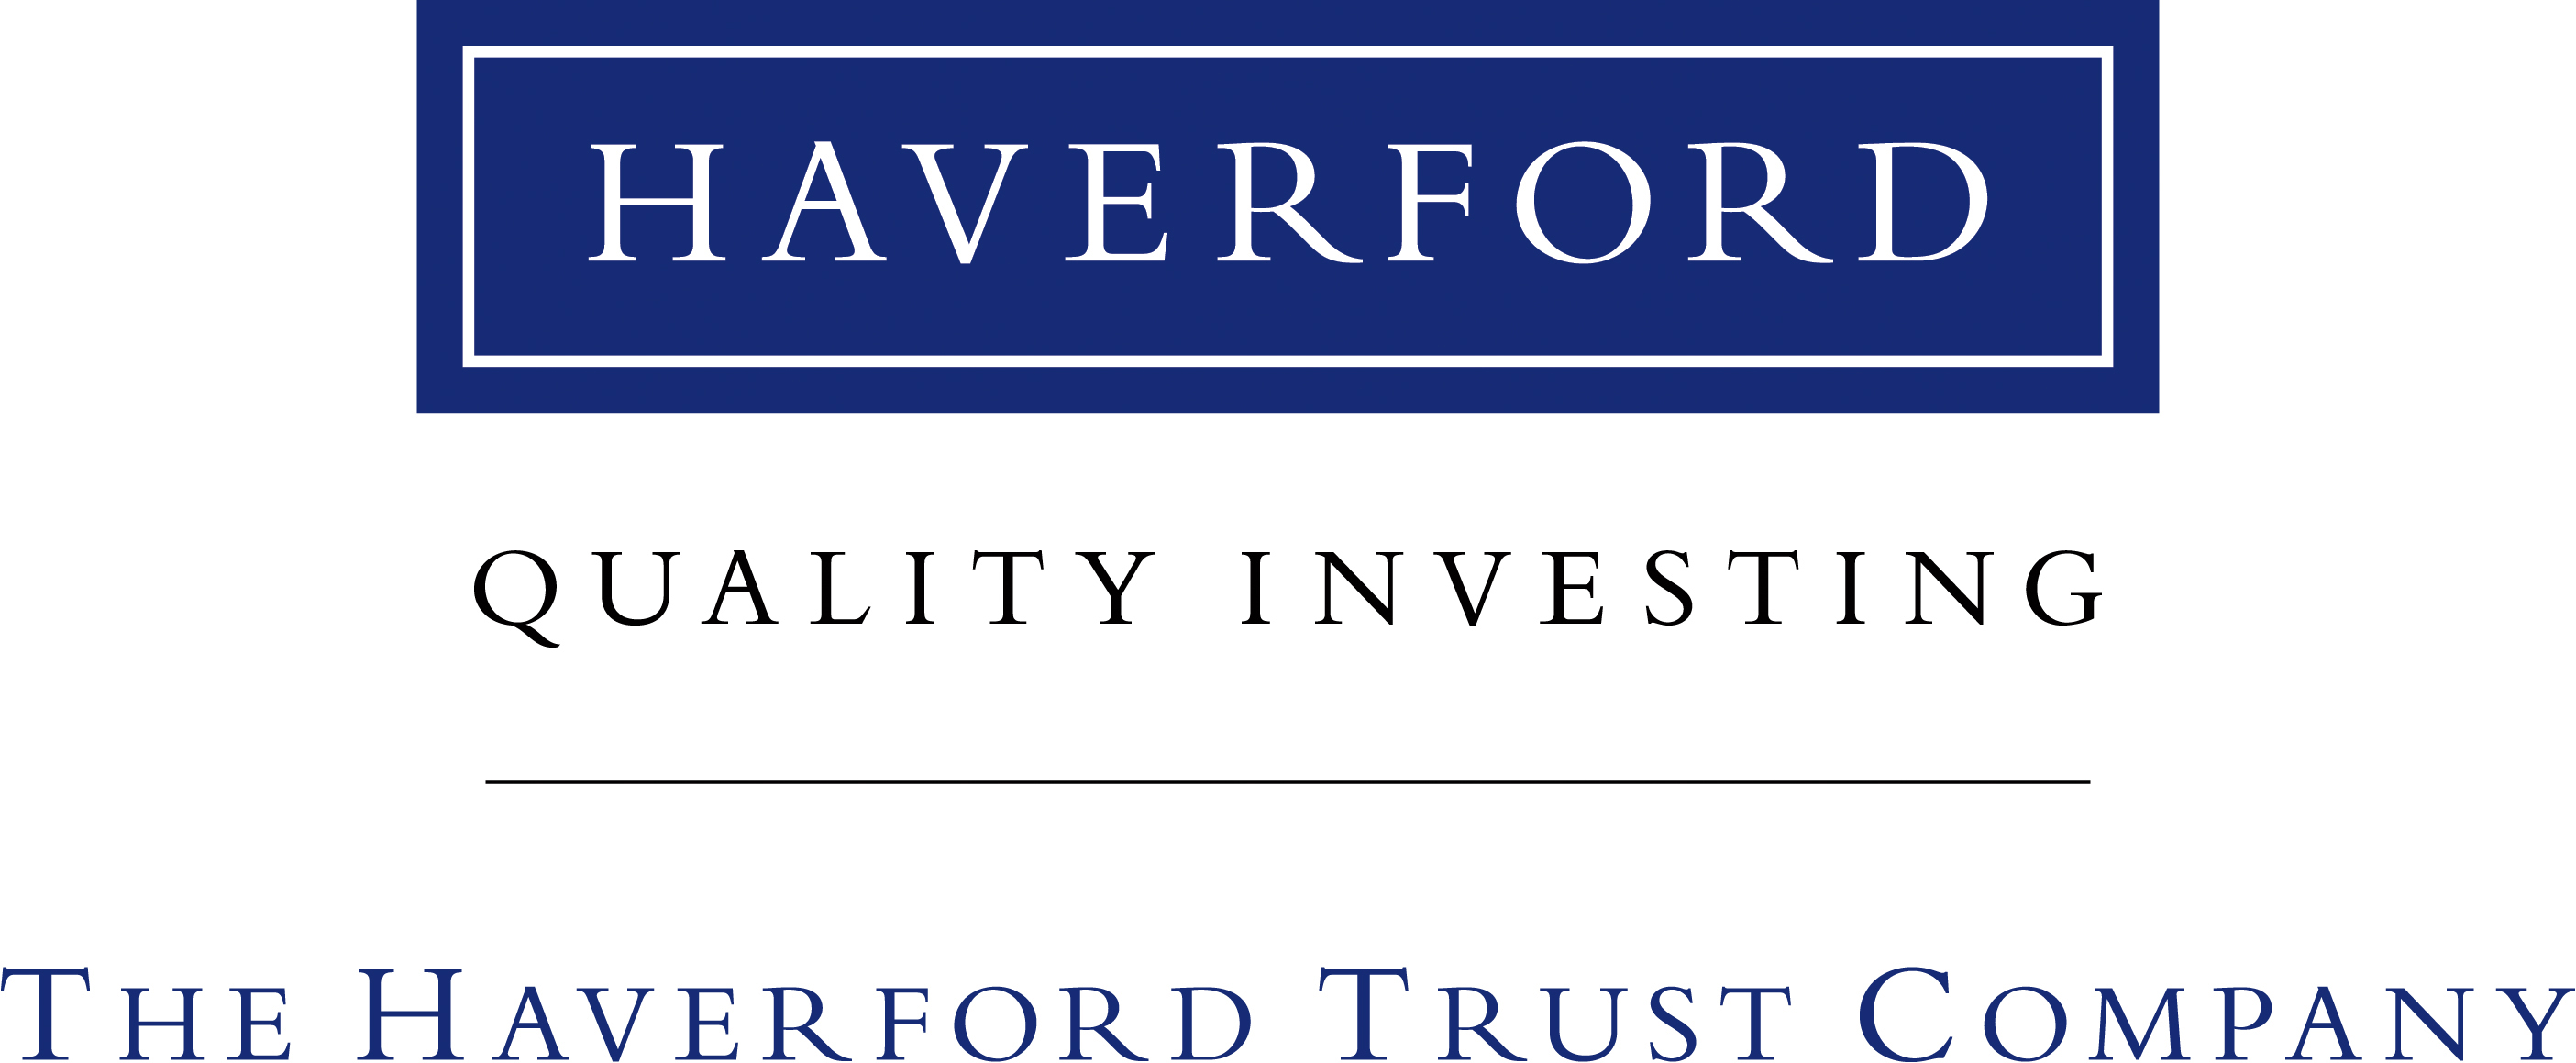 The Haverford Trust Company